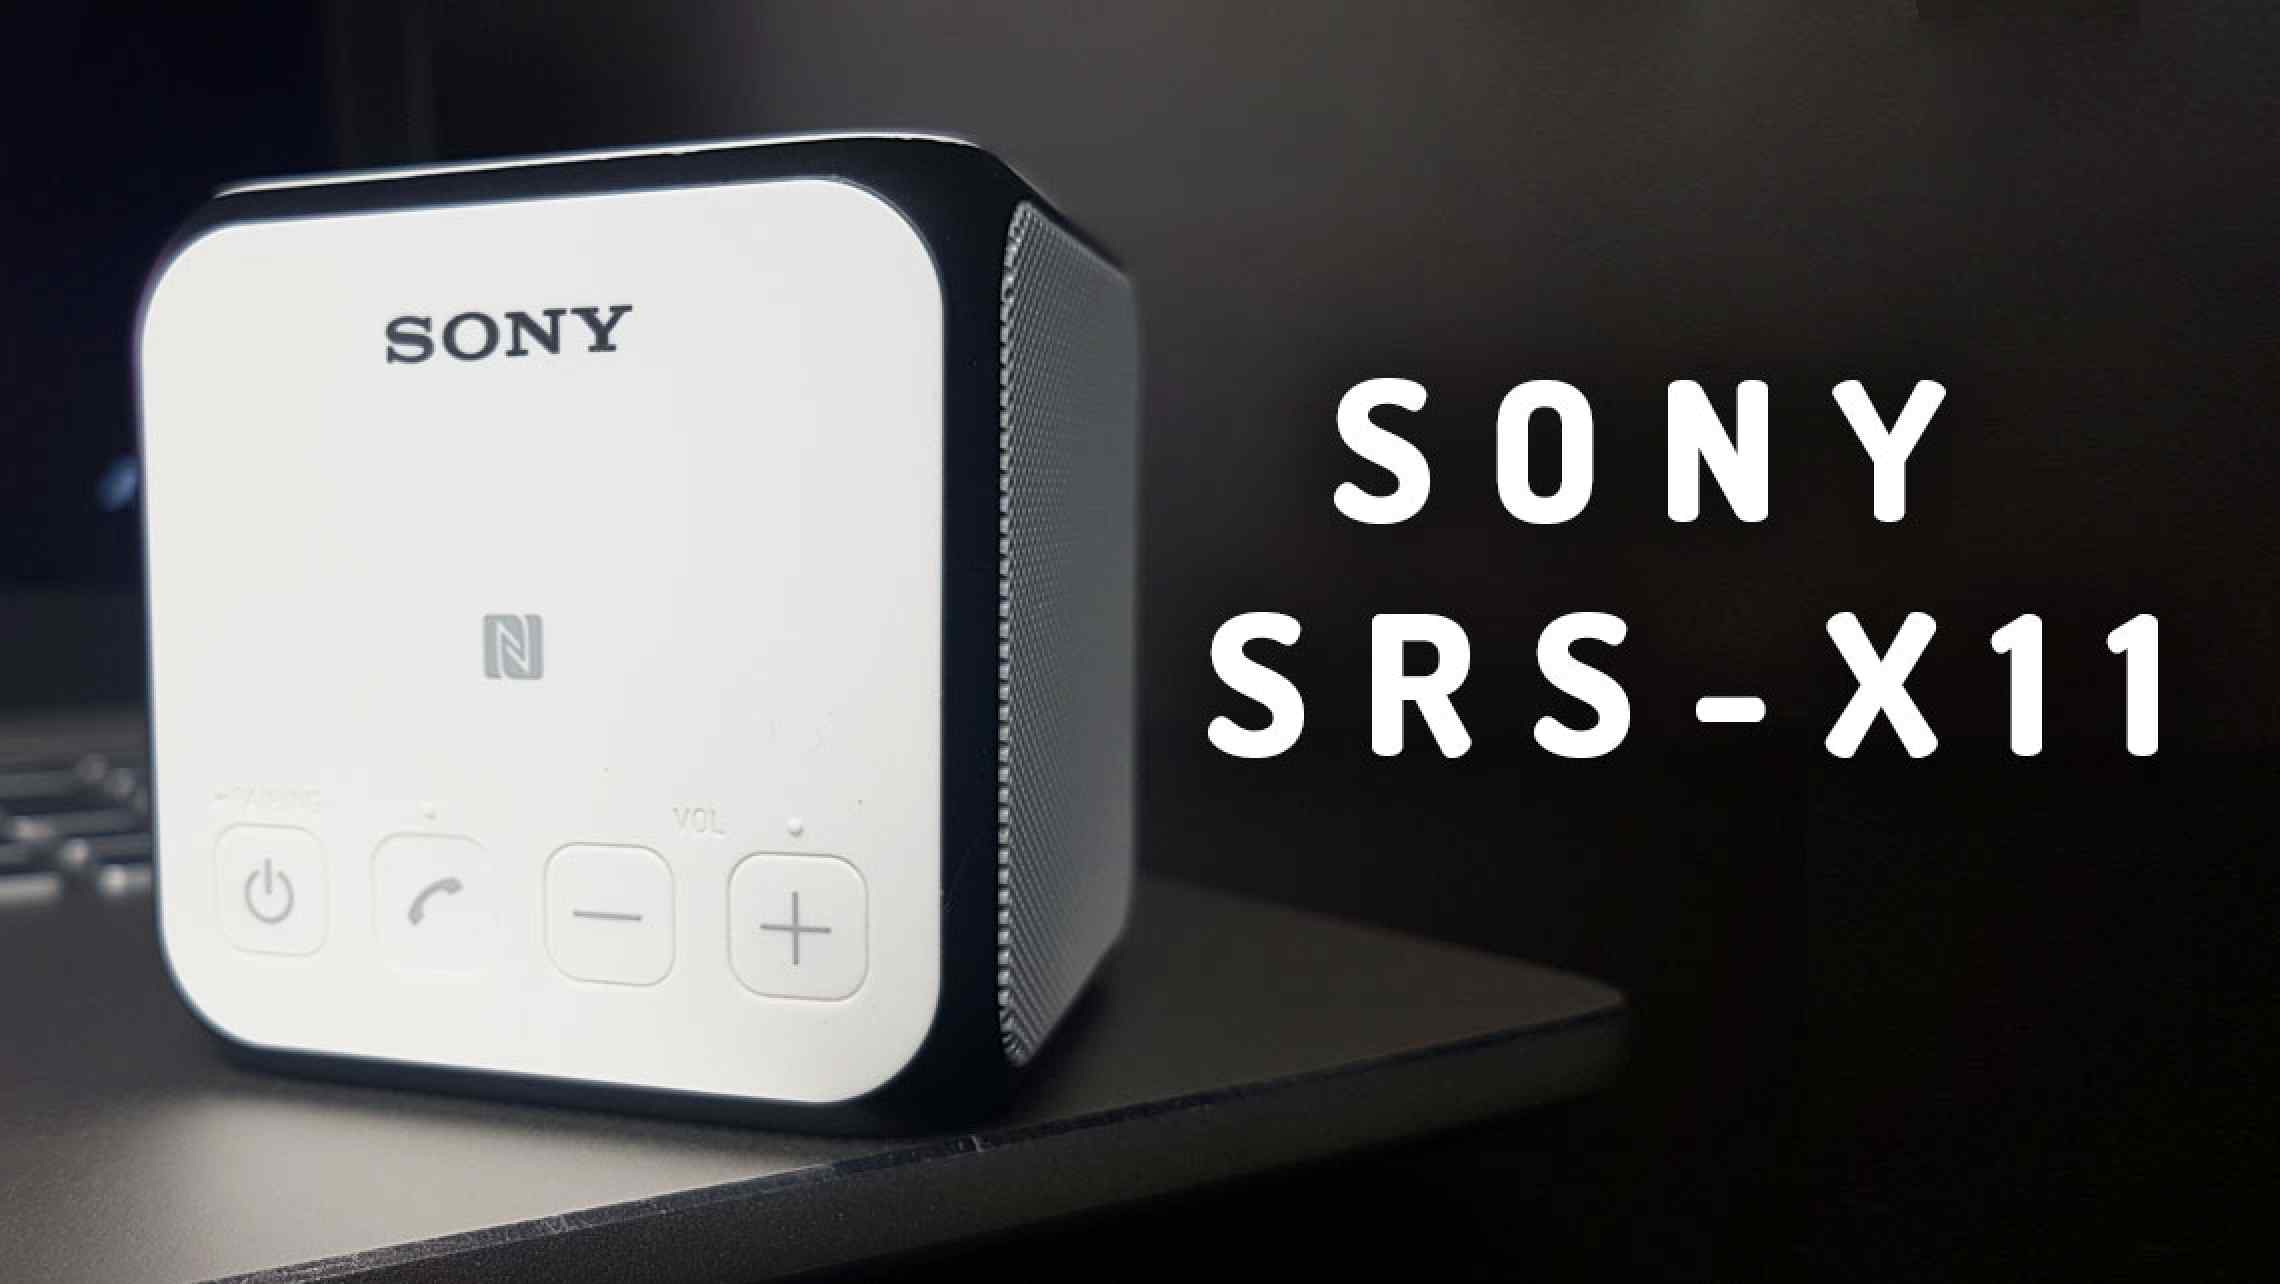 Sony SRS-X11 Full Review - The Smallest Sony | SpeakerFanatic